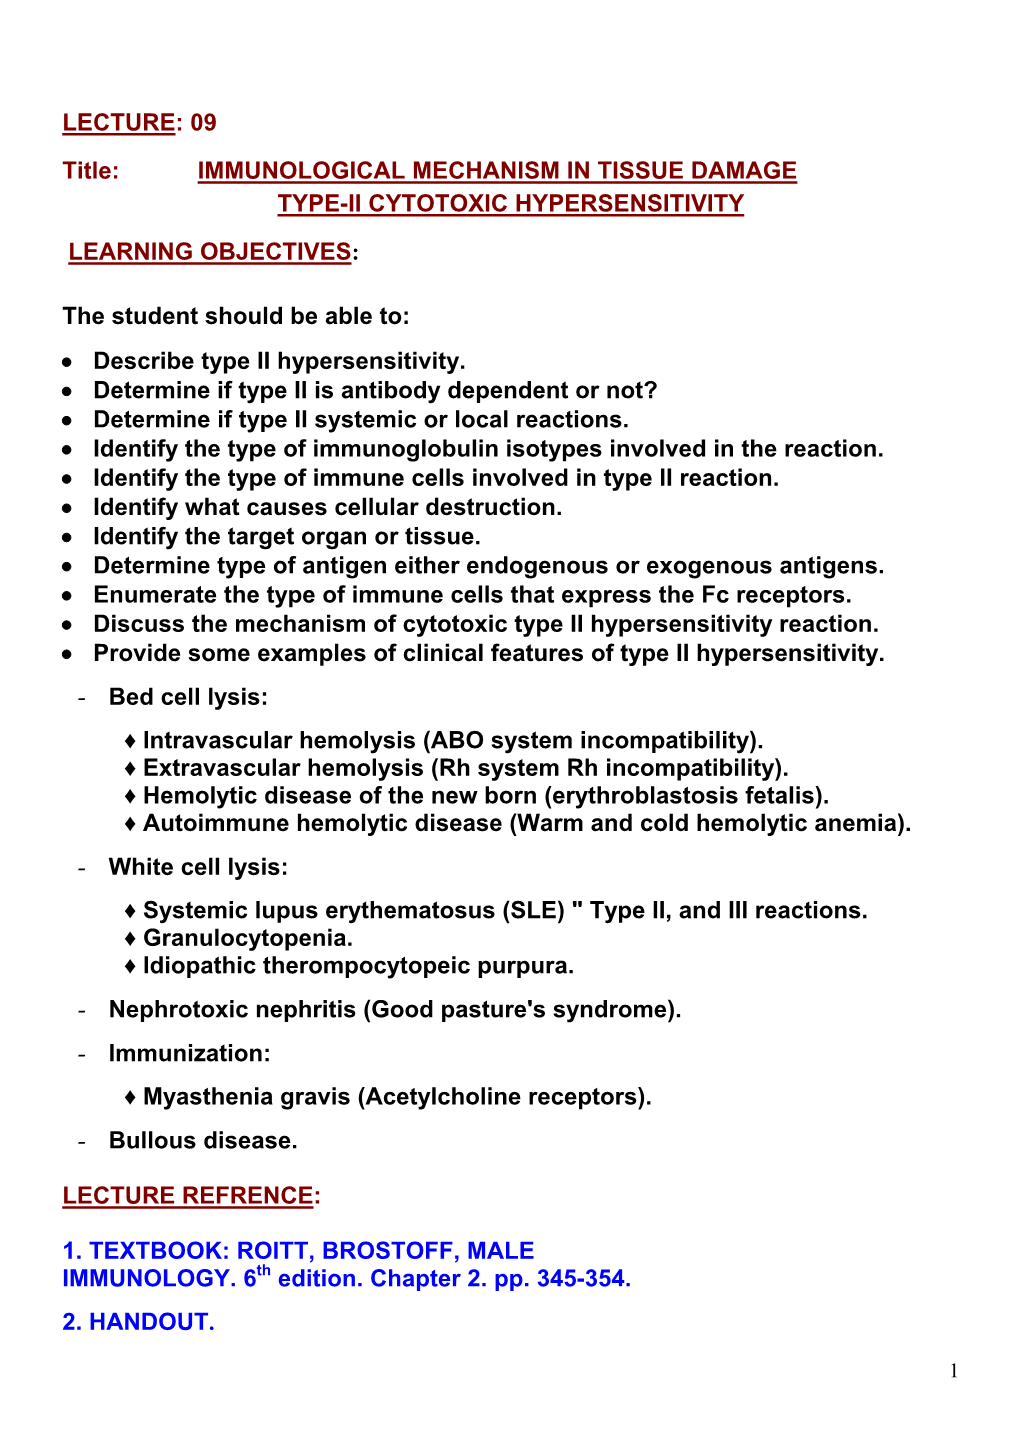 LECTURE: 09 Title: IMMUNOLOGICAL MECHANISM in TISSUE DAMAGE TYPE-II CYTOTOXIC HYPERSENSITIVITY